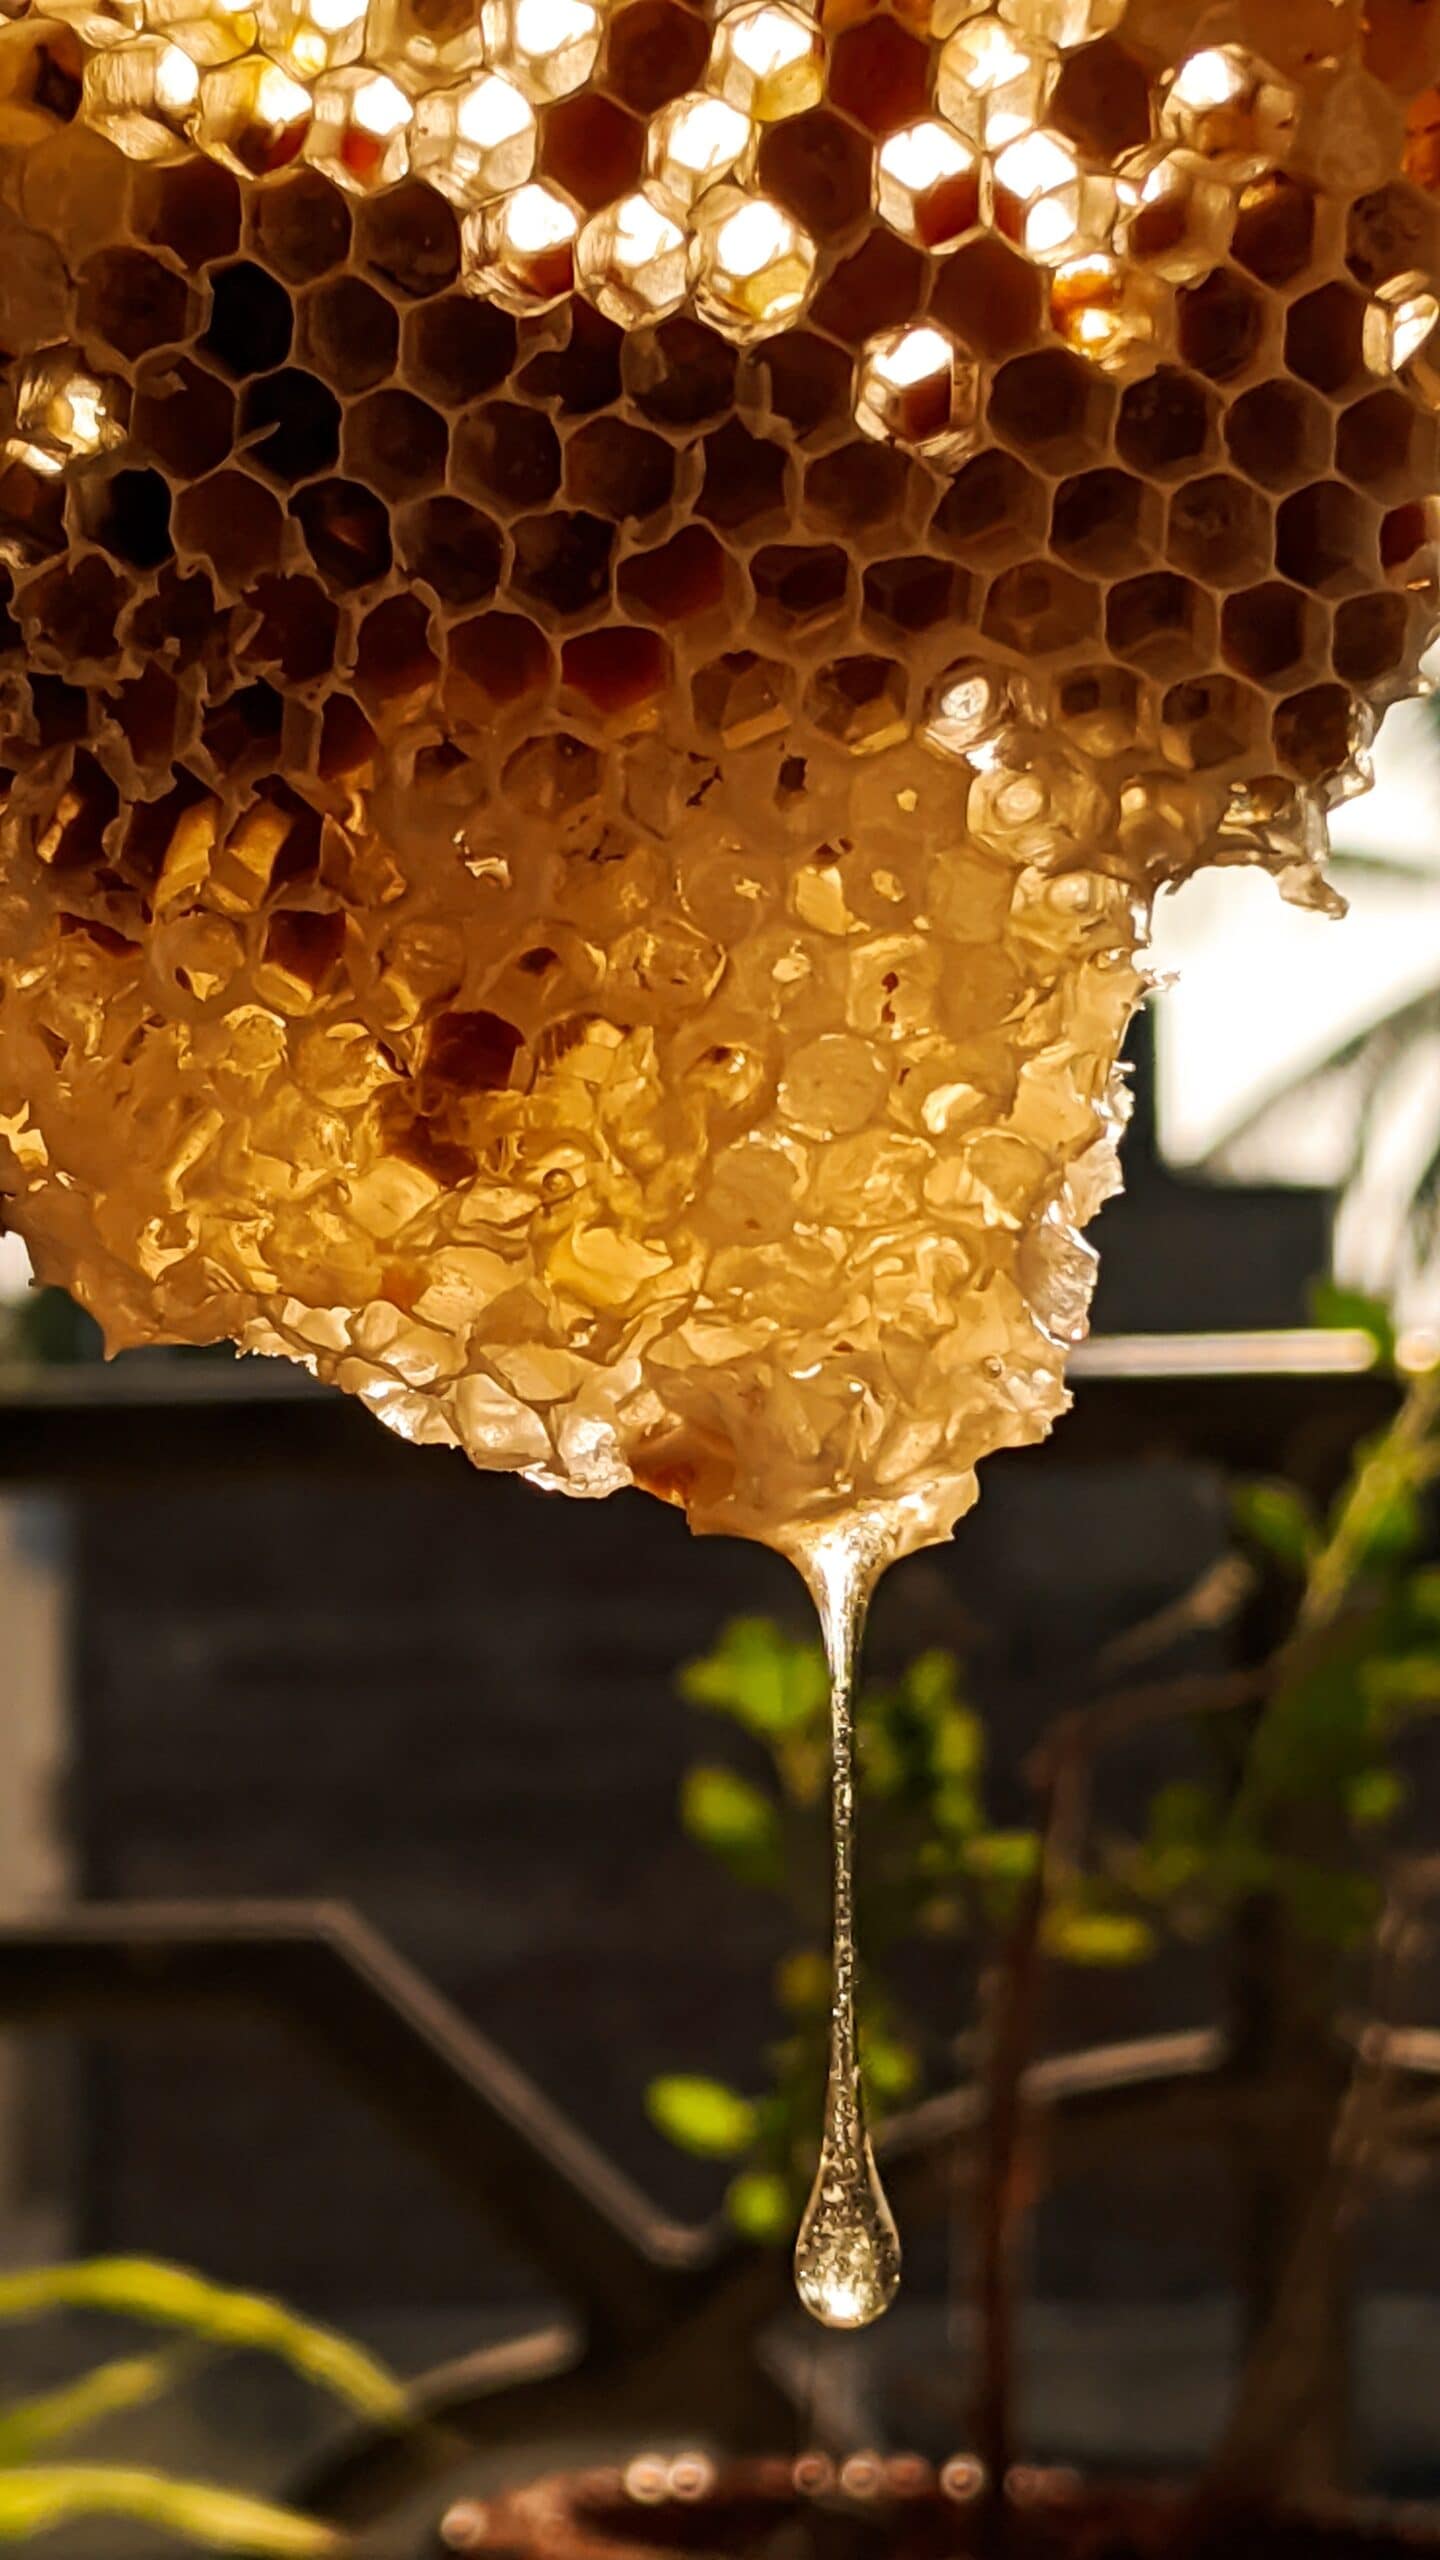 Honey comb with honey dripping off - foods you should never refrigerate